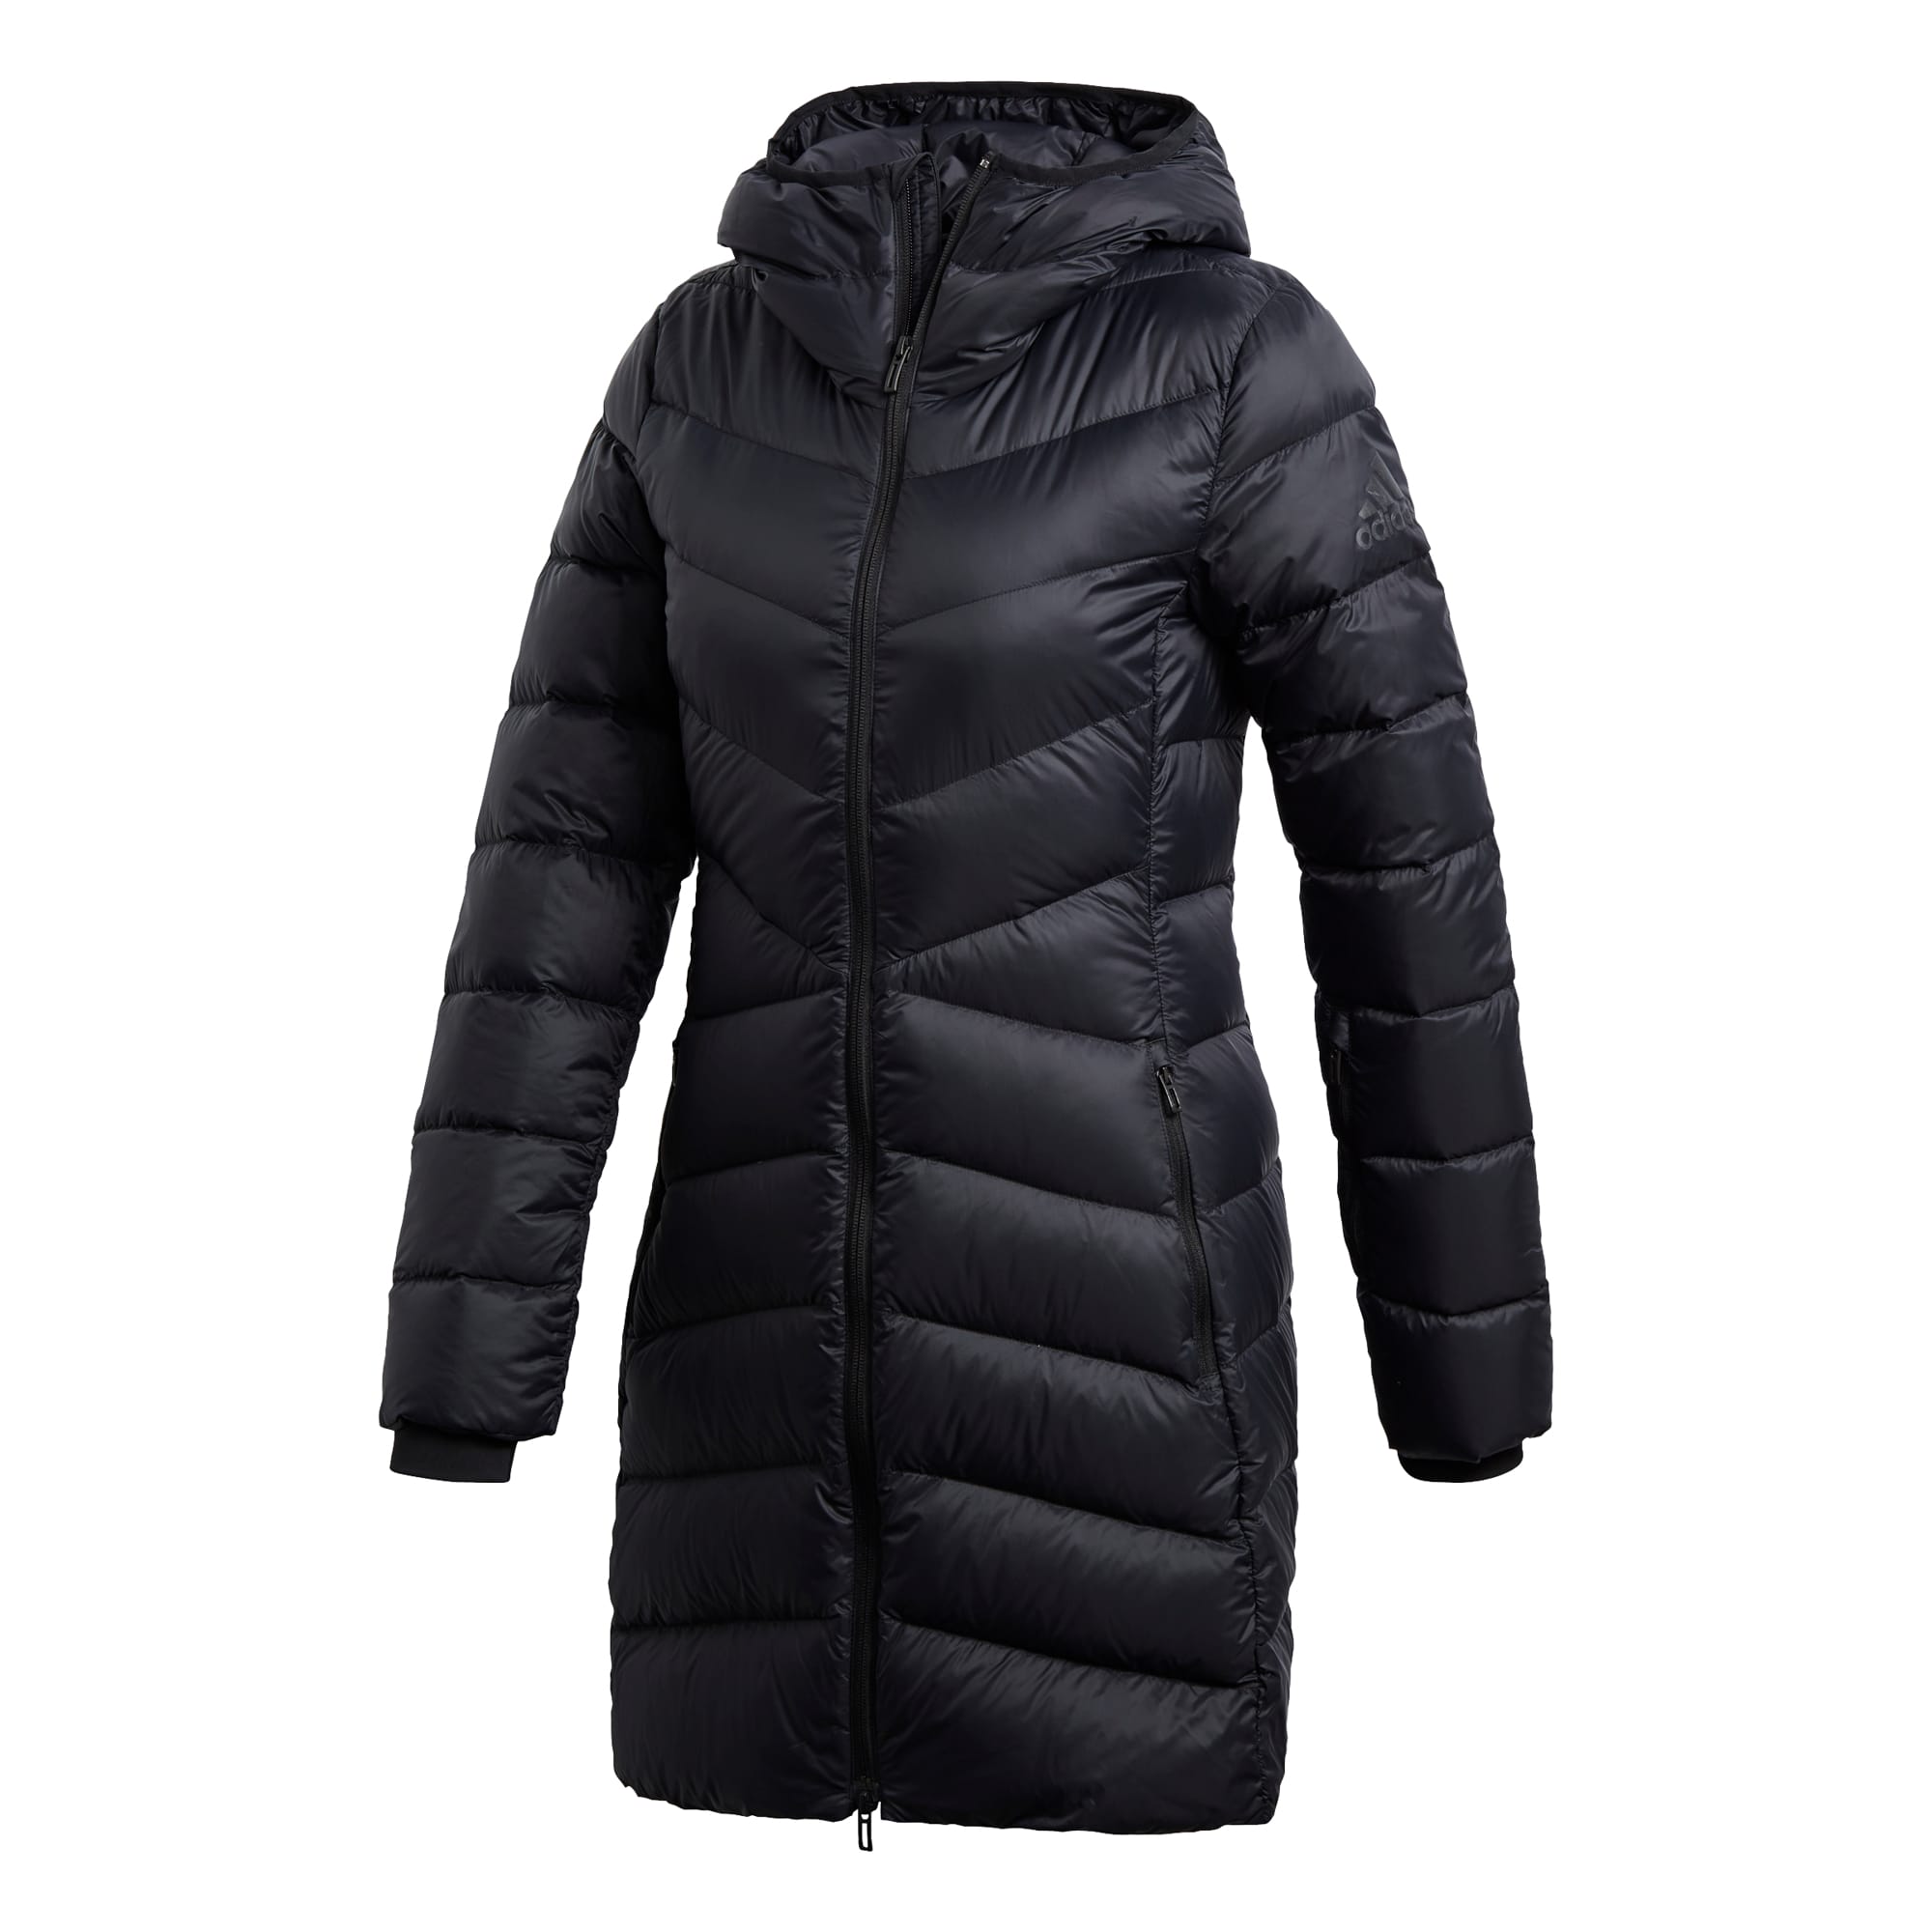 lucht sneeuw Krachtig Buy Adidas Women's Cw Nuvic Jacket from Outnorth